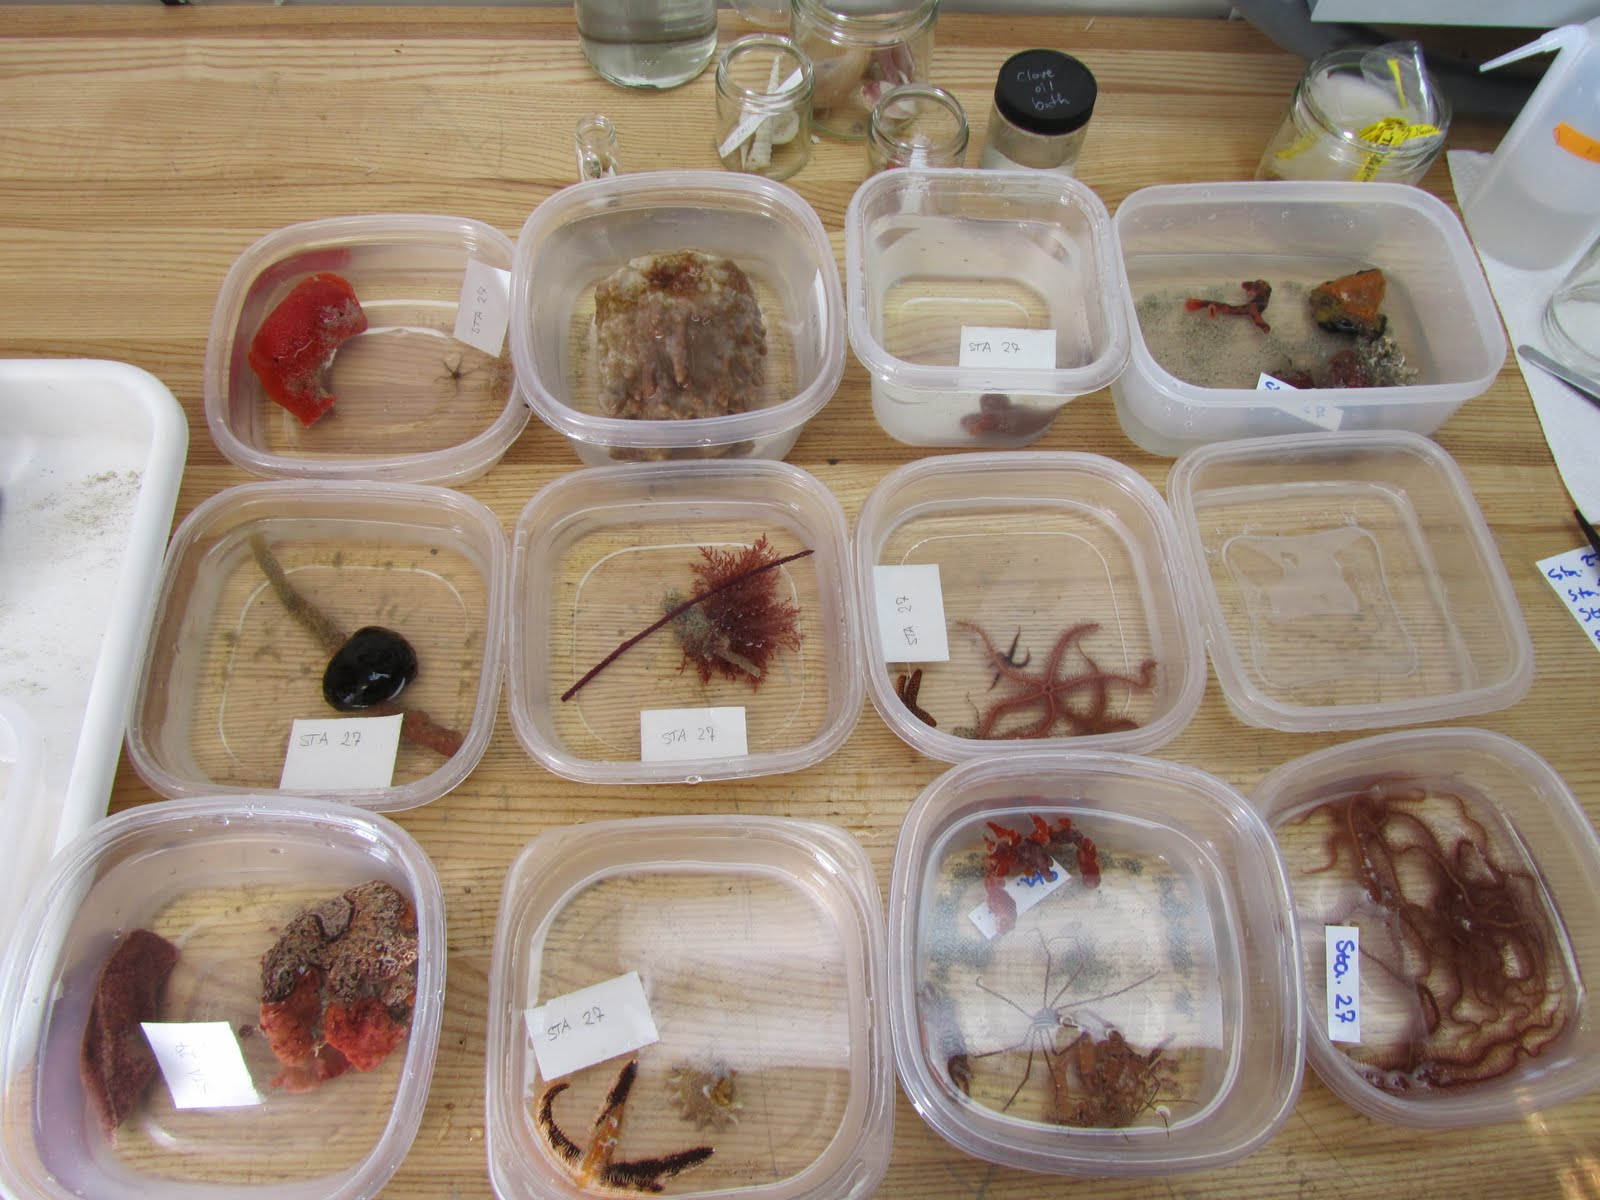 specimens and labels sorted in shallow tupperware containers